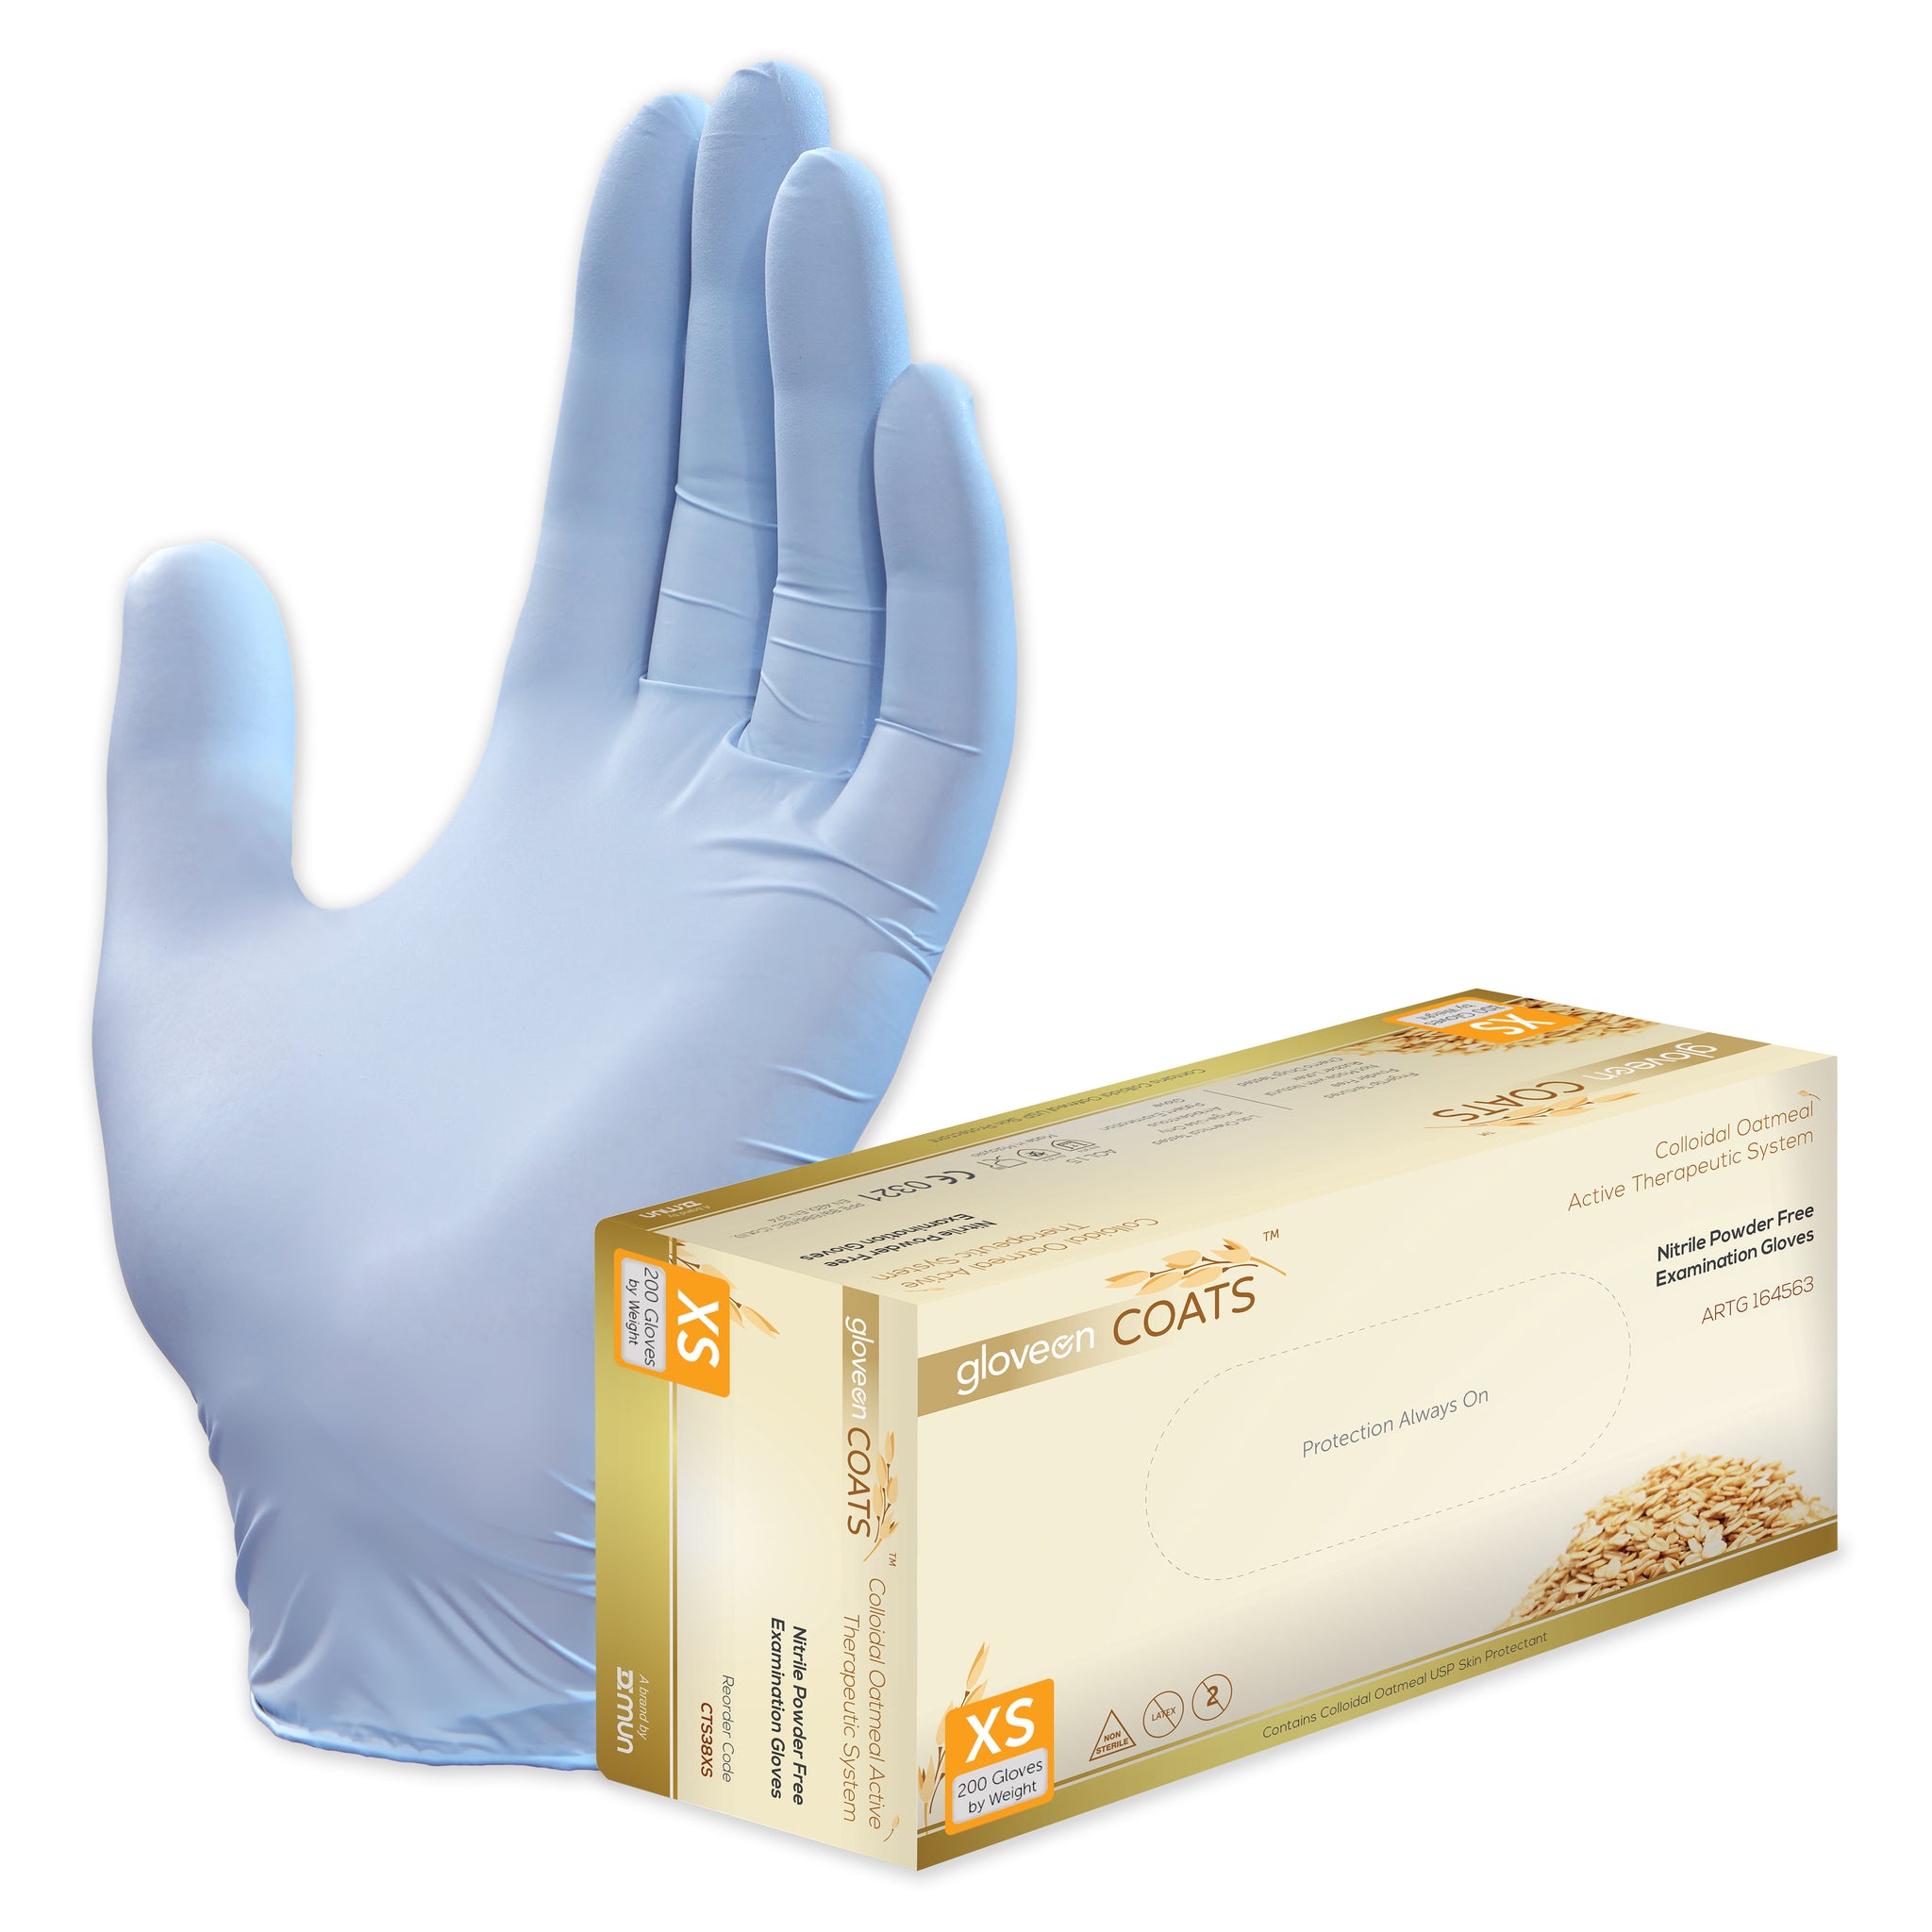 Nitrile Exam Gloves with Colloidal Oatmeal System, Powder Free, Non-Sterile, Fingertip Textured, Colloidal Oats Coated, Standard Cuff, Dawn Blue - Box of 200, XS